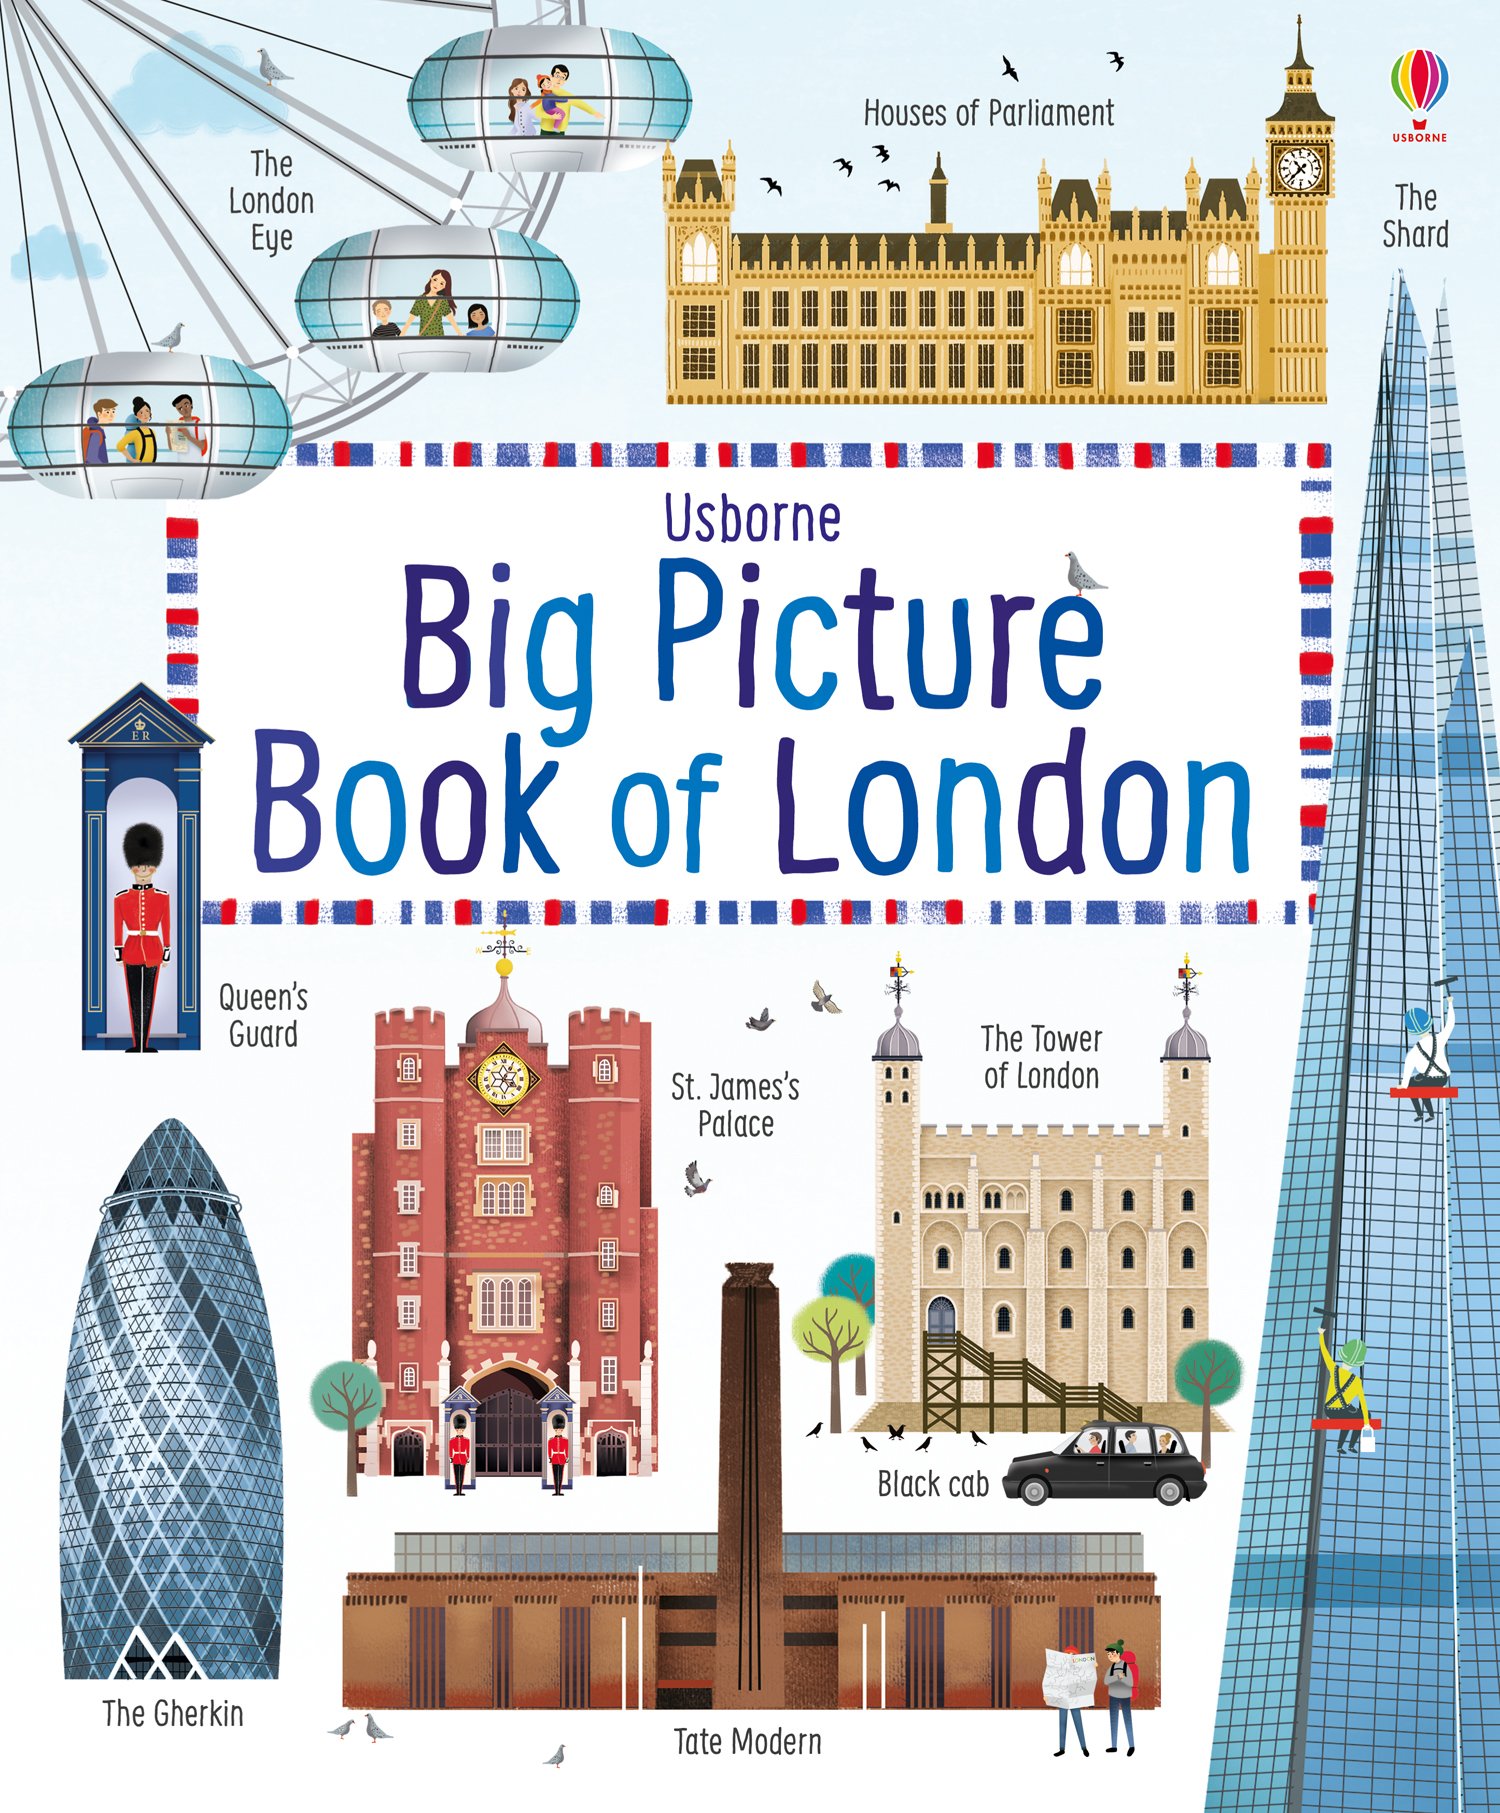 ChIB London My Big Picture Book of London HB